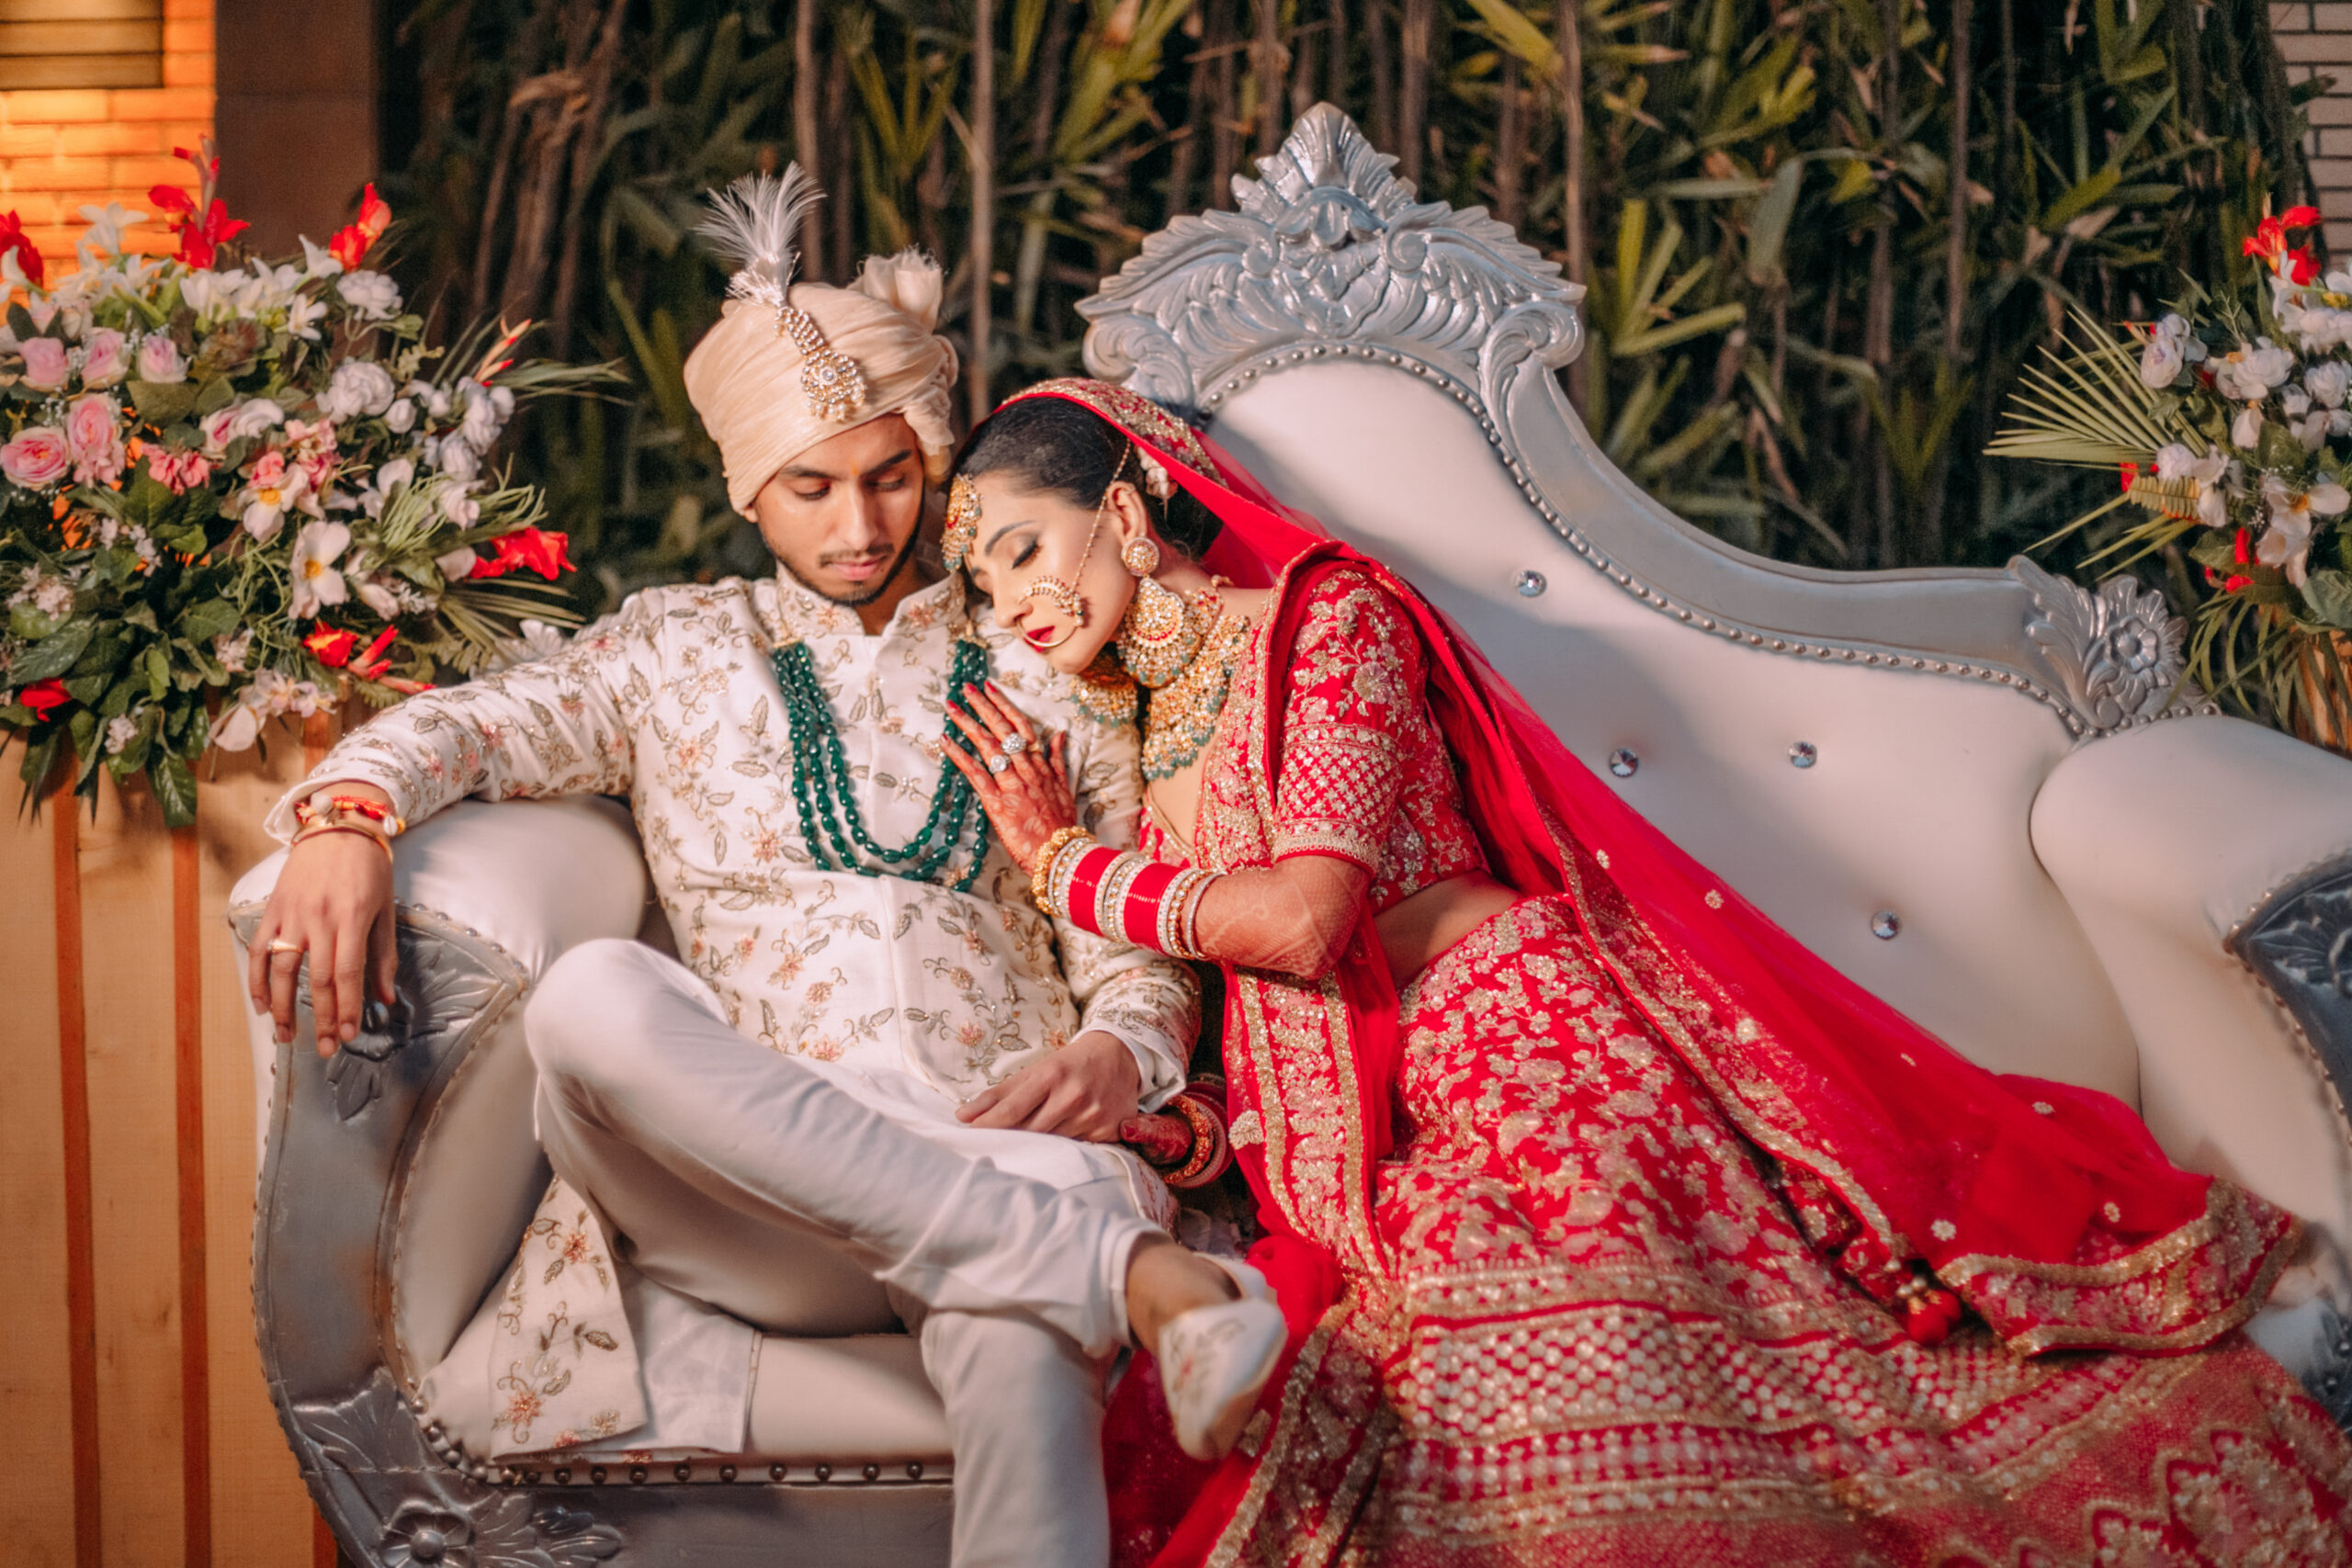 My Wedding - Romantic poses to consider on your wedding day...  https://bit.ly/3yQGHAH #MyWedding | Facebook